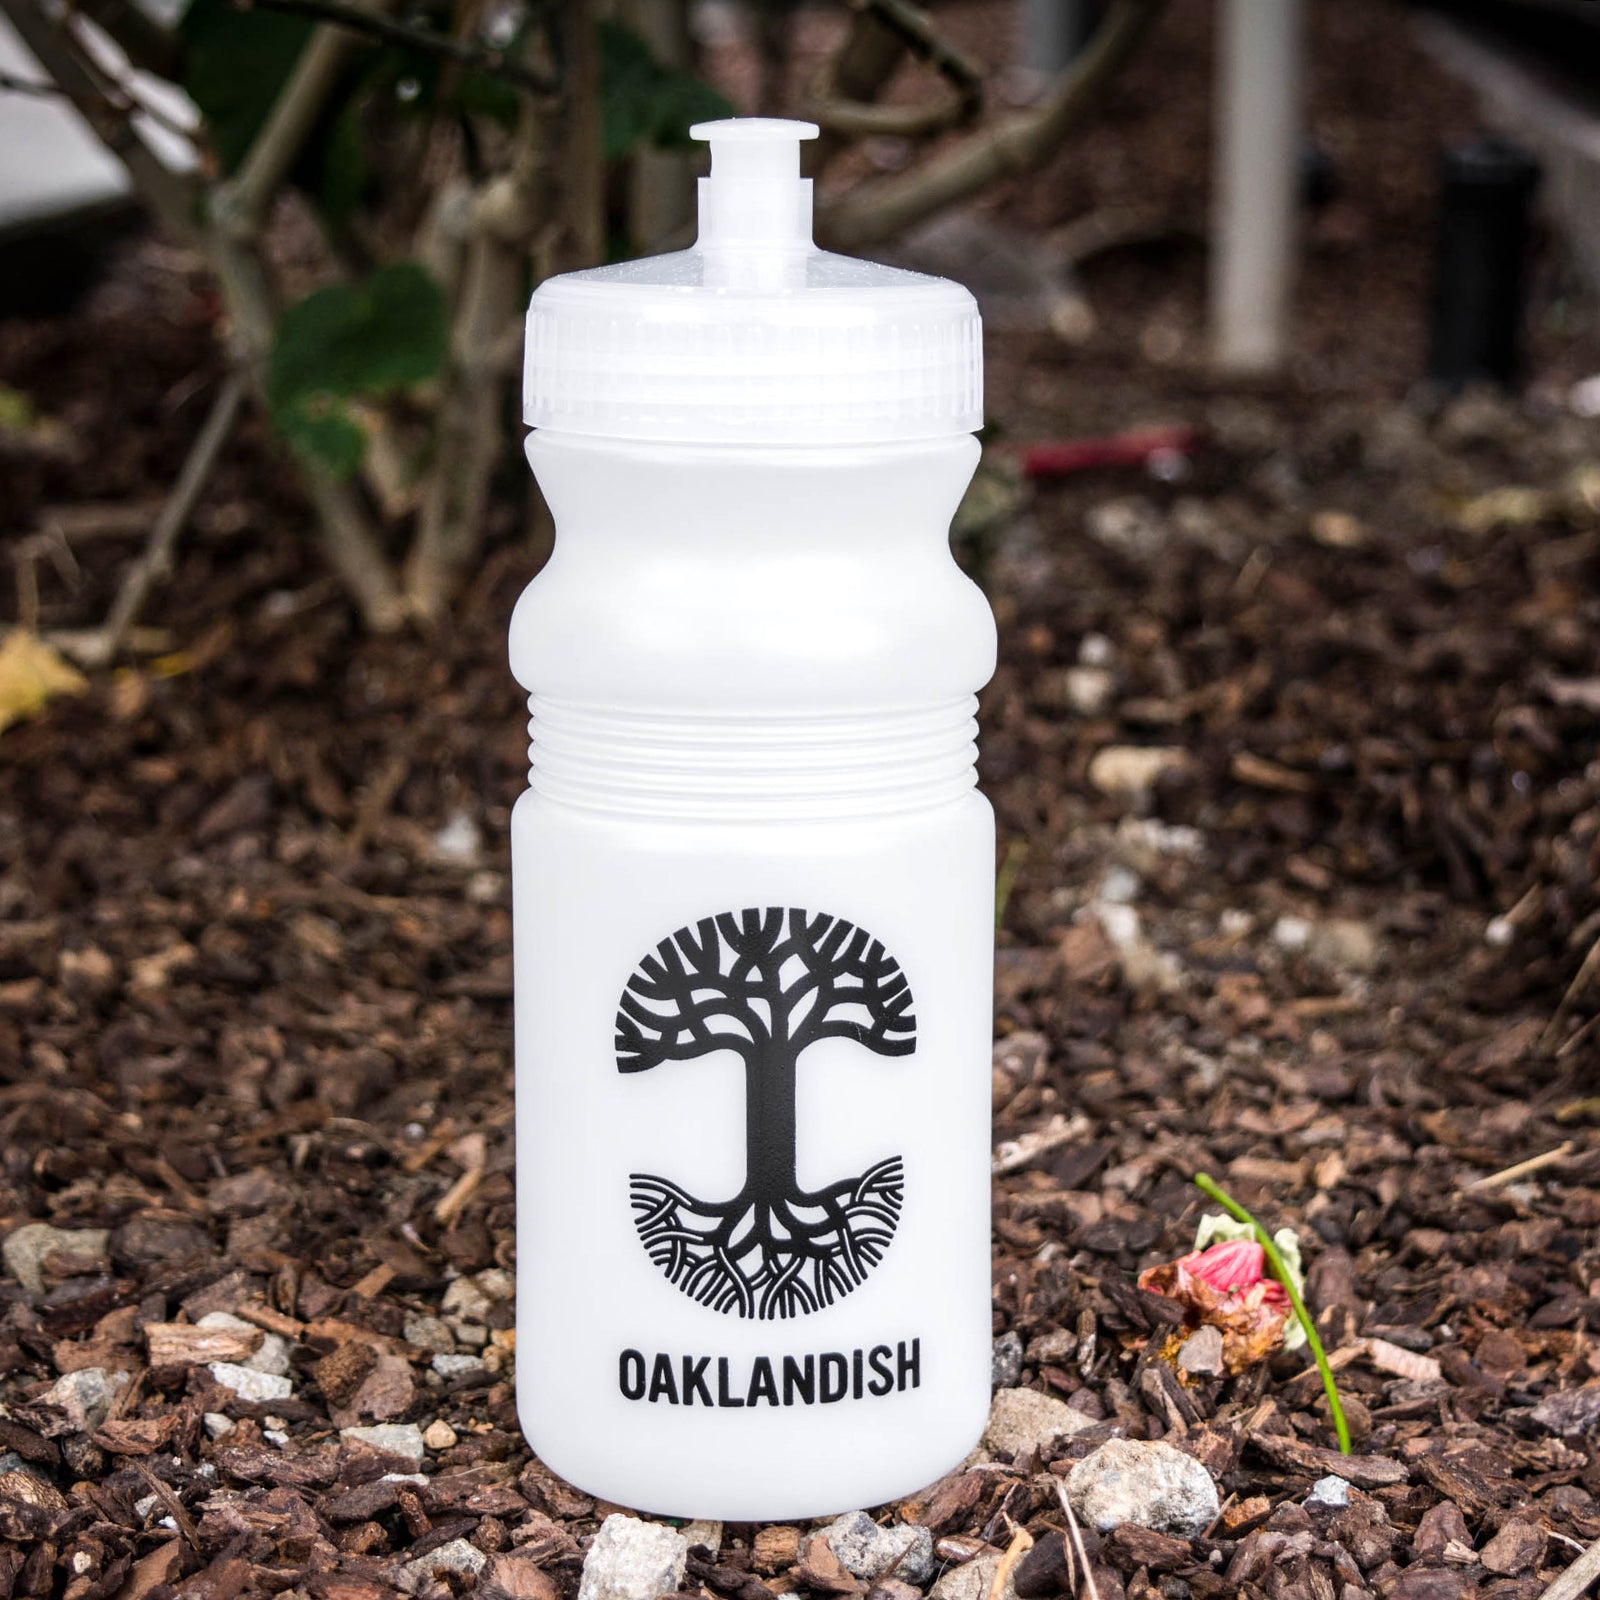 Frost white bicycle water bottle with a black Oaklandish tree logo and wordmark in a wooded outdoor area.